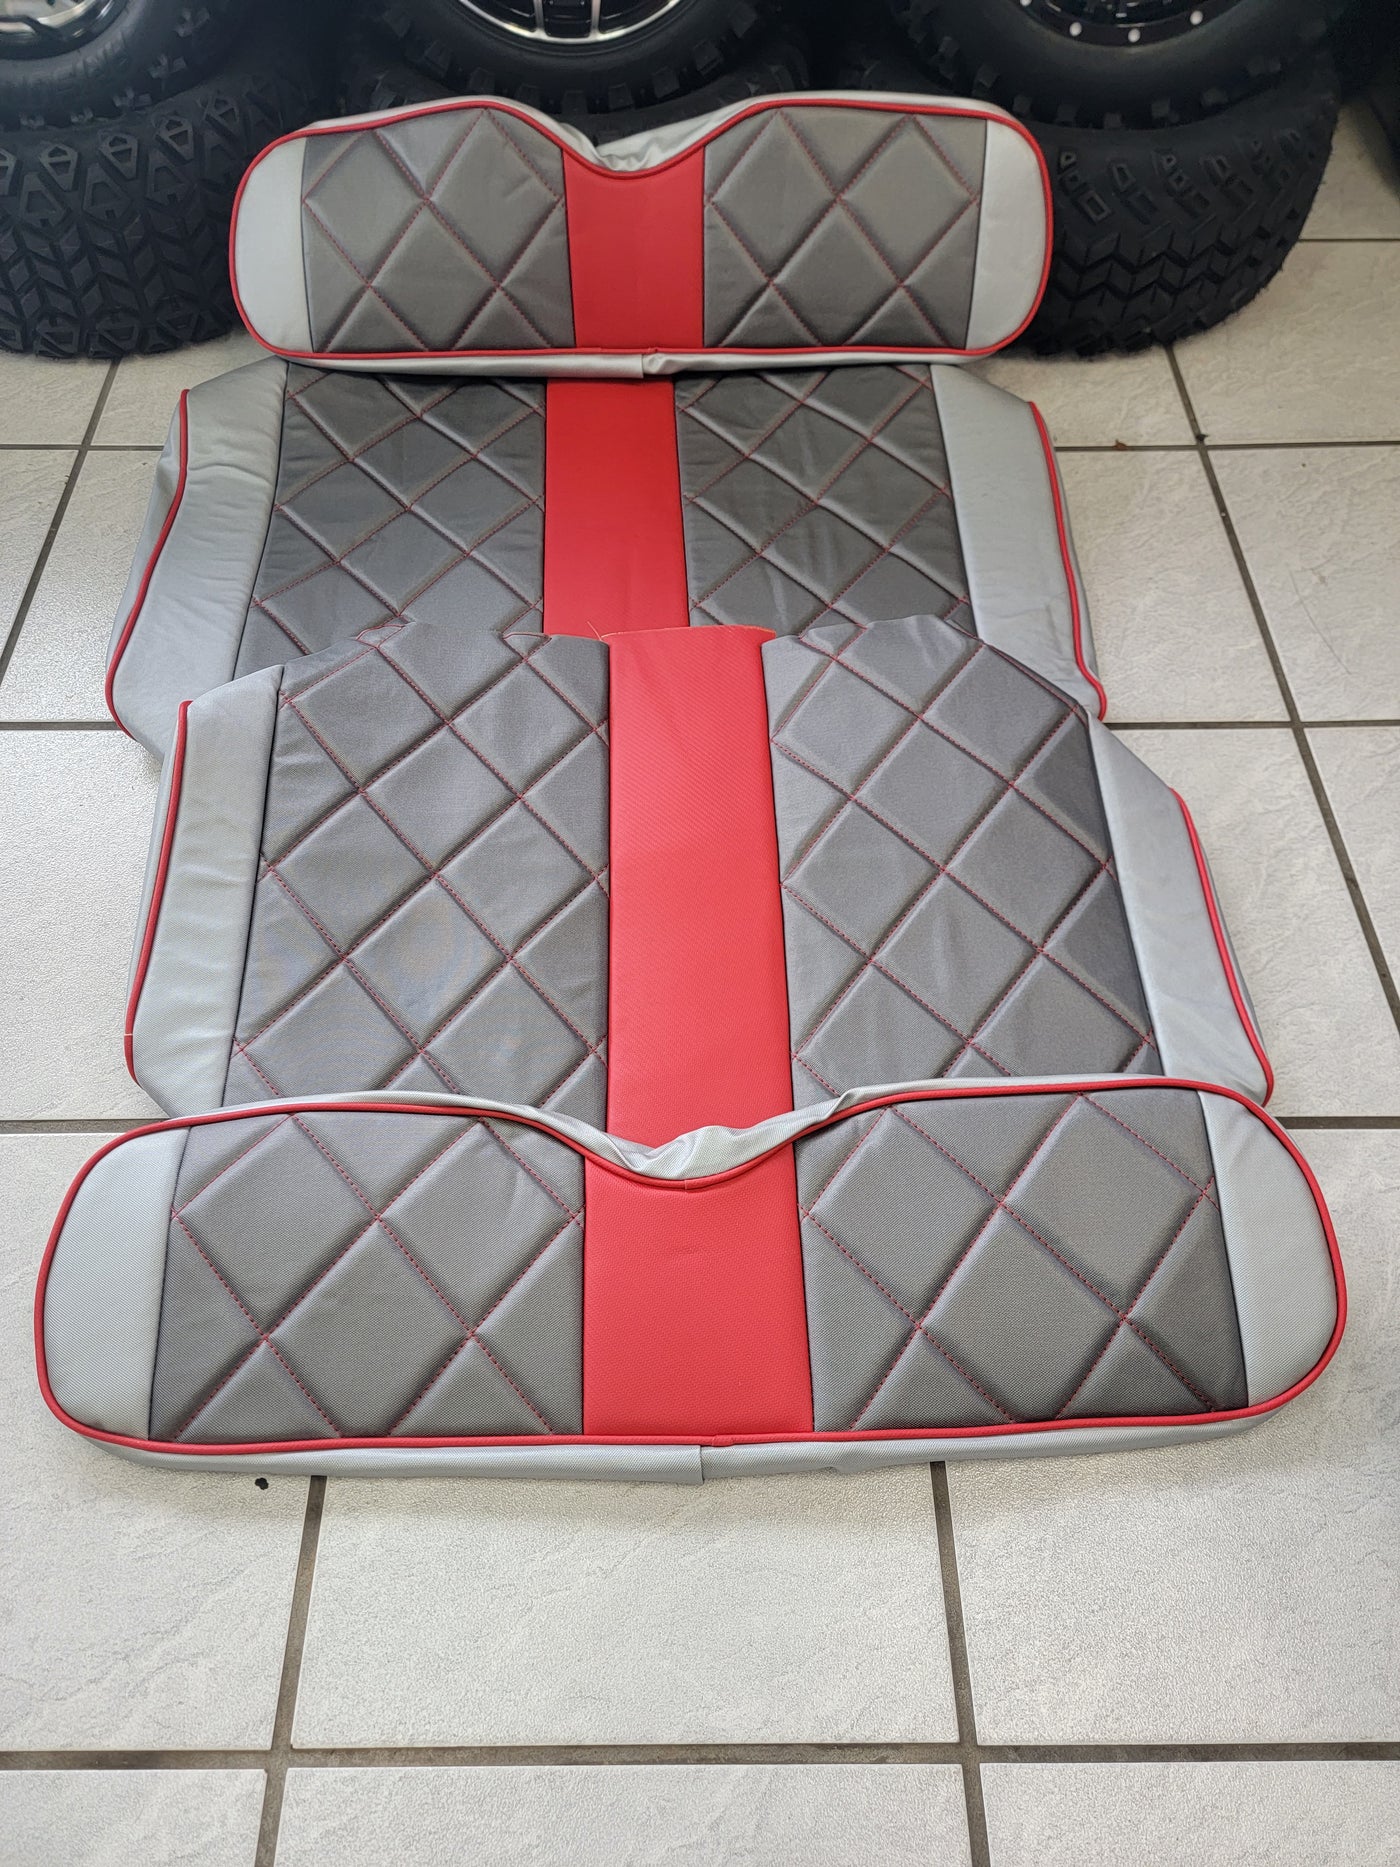 Custom Diamond Stich Silver , Charcoal & Red Ez-Go (Ezgo) Txt/Rxv or Club Car DS 2000-2013 Cart Front Rear Seat Covers